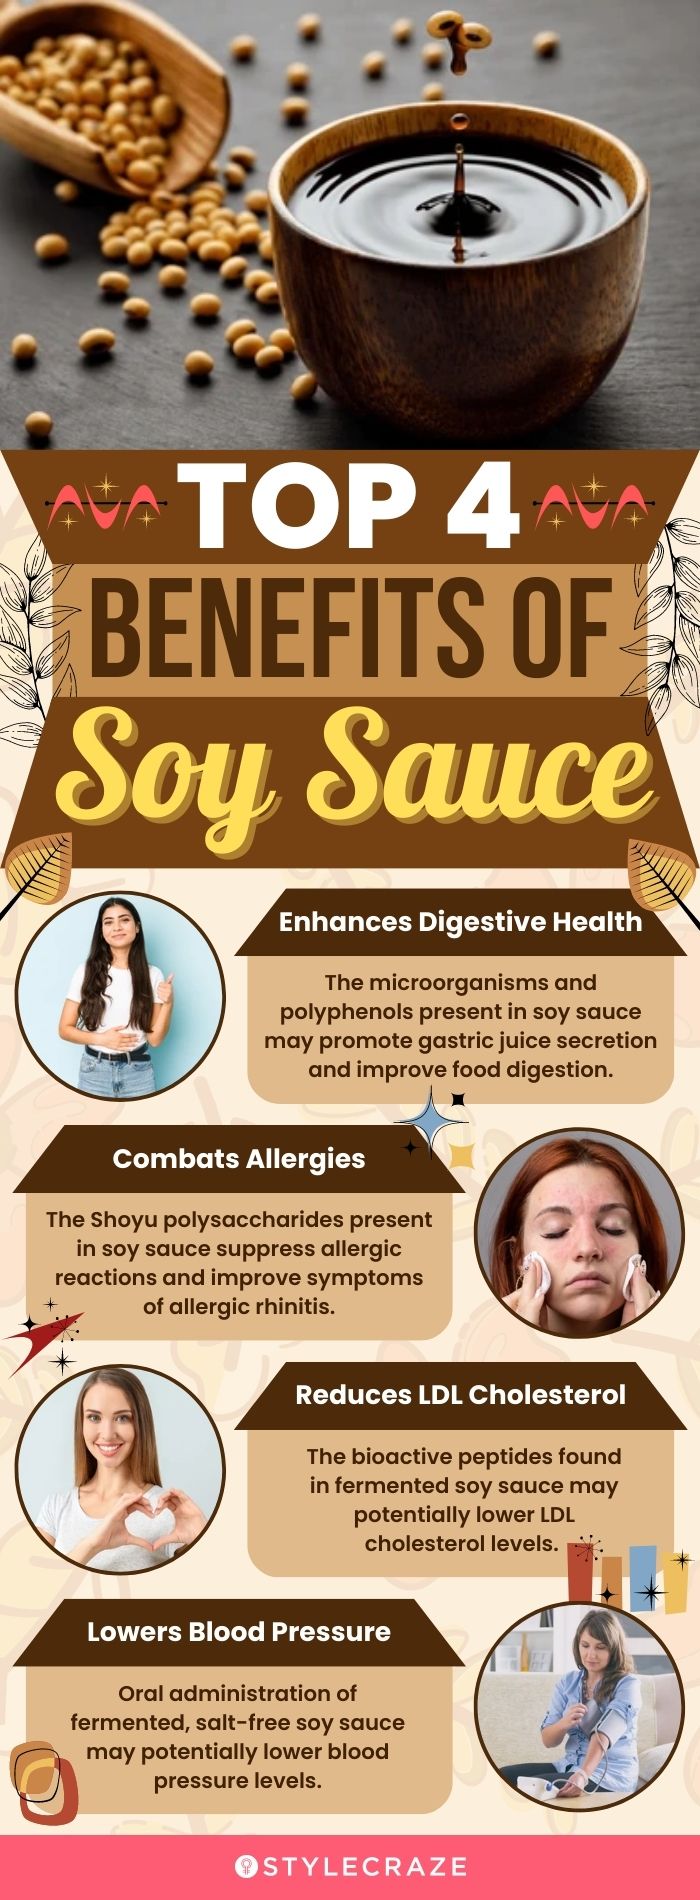 top 4 benefits of soy sauce (infographic)